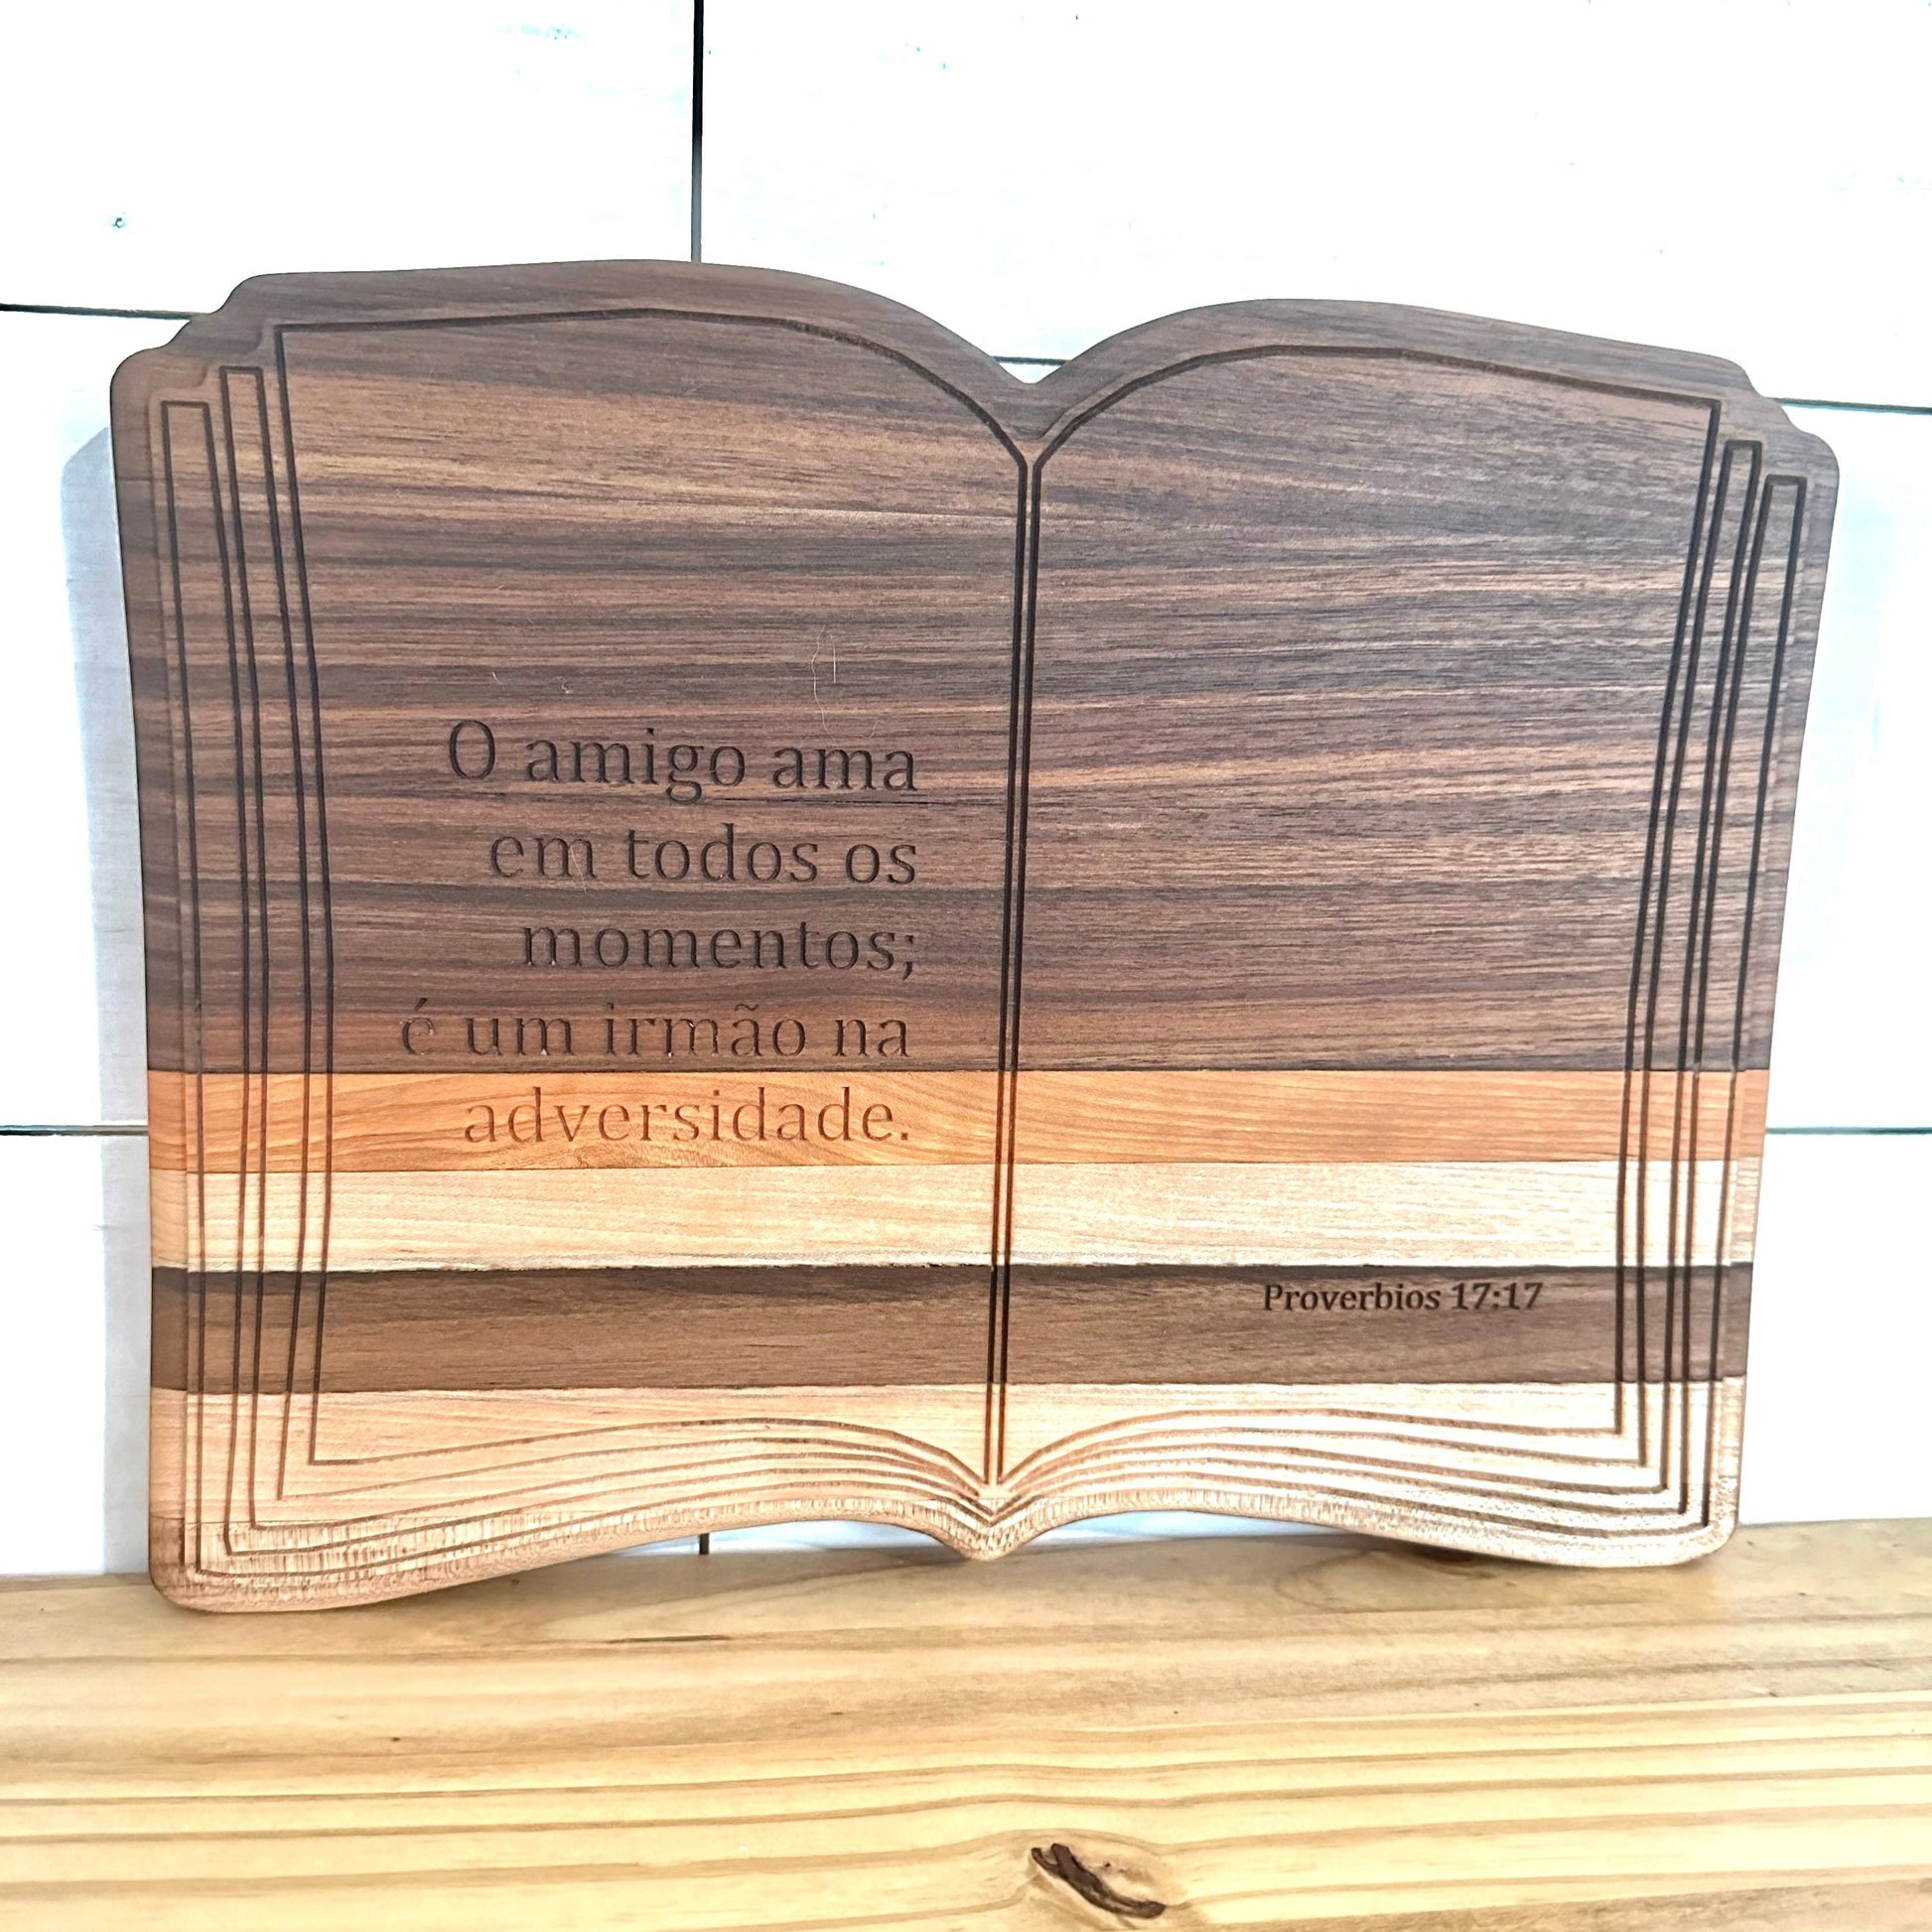 book-shaped cutting board with personalized message